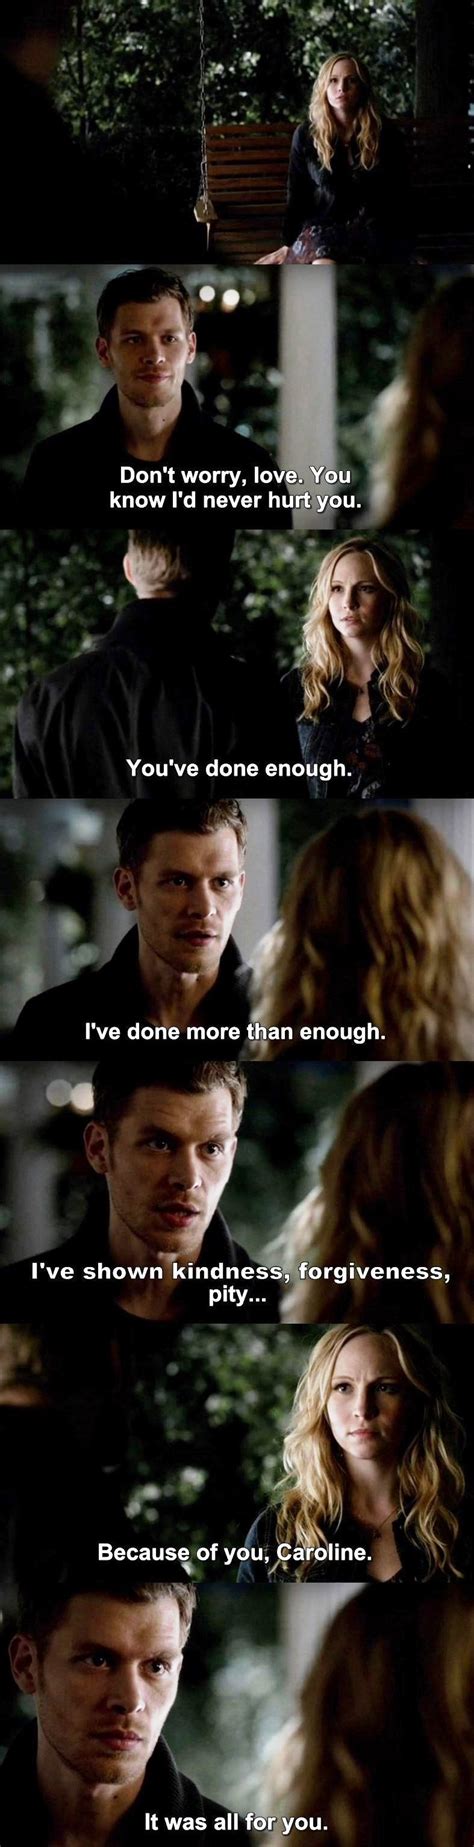 Klaus vampire diaries love quotes | f quotes daily from 66.media.tumblr.com if you're a fan of cw's the vampire diaries, then you also have to be *mildly* obsessed with the show's two main hunks, the salvatore brothers. The Vampire Diaries TVD S04E14 - Klaus & Caroline | Vampire diaries, Vampire diaries quotes ...